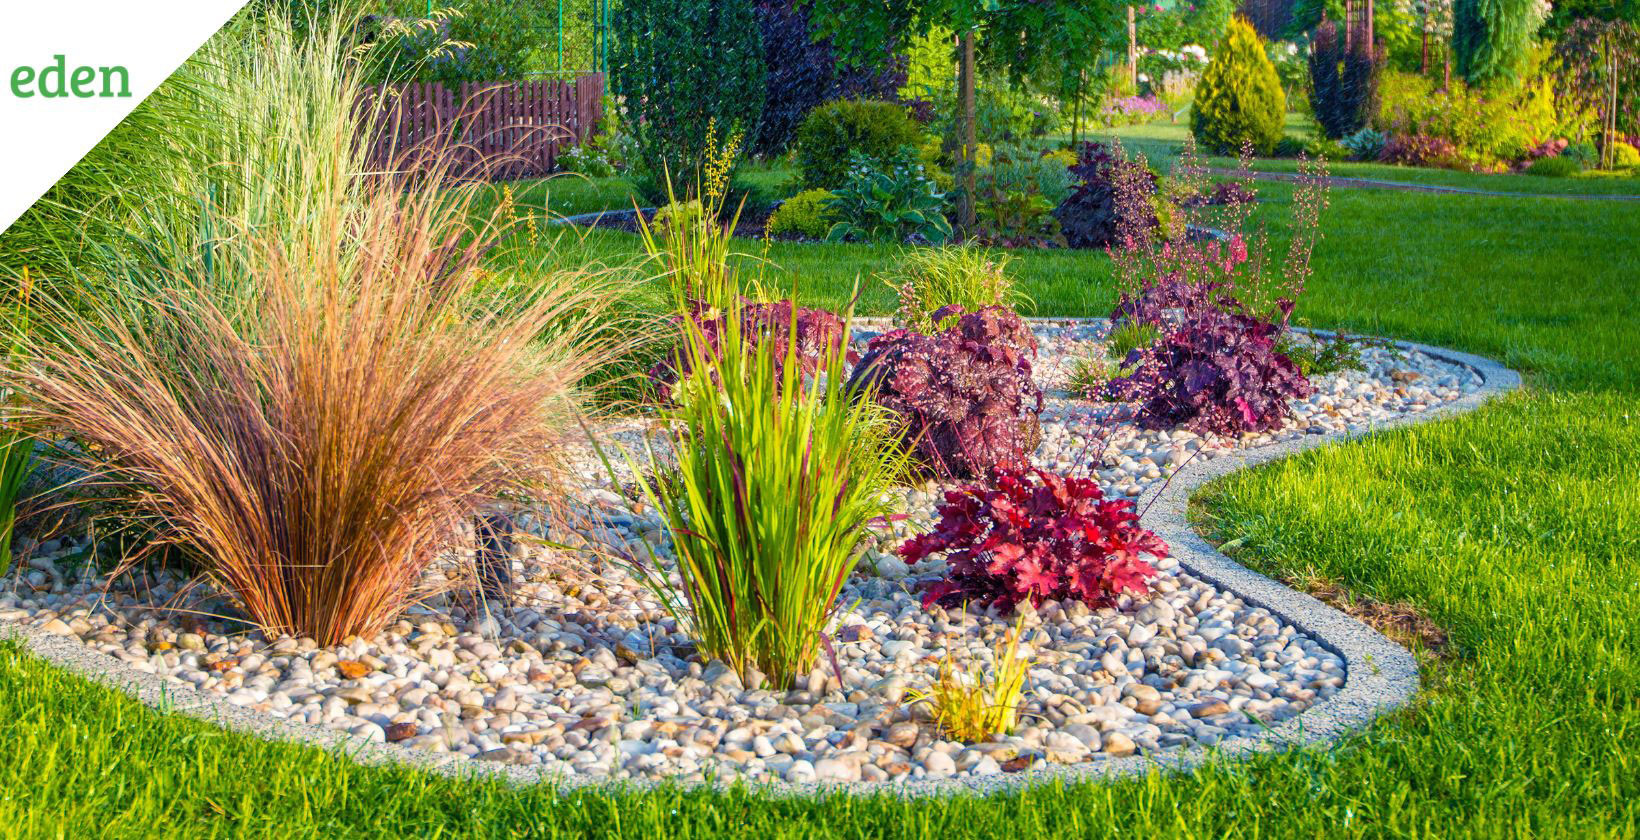 Landscaping Ideas With River Rock  Eden Lawn Care and Snow Removal